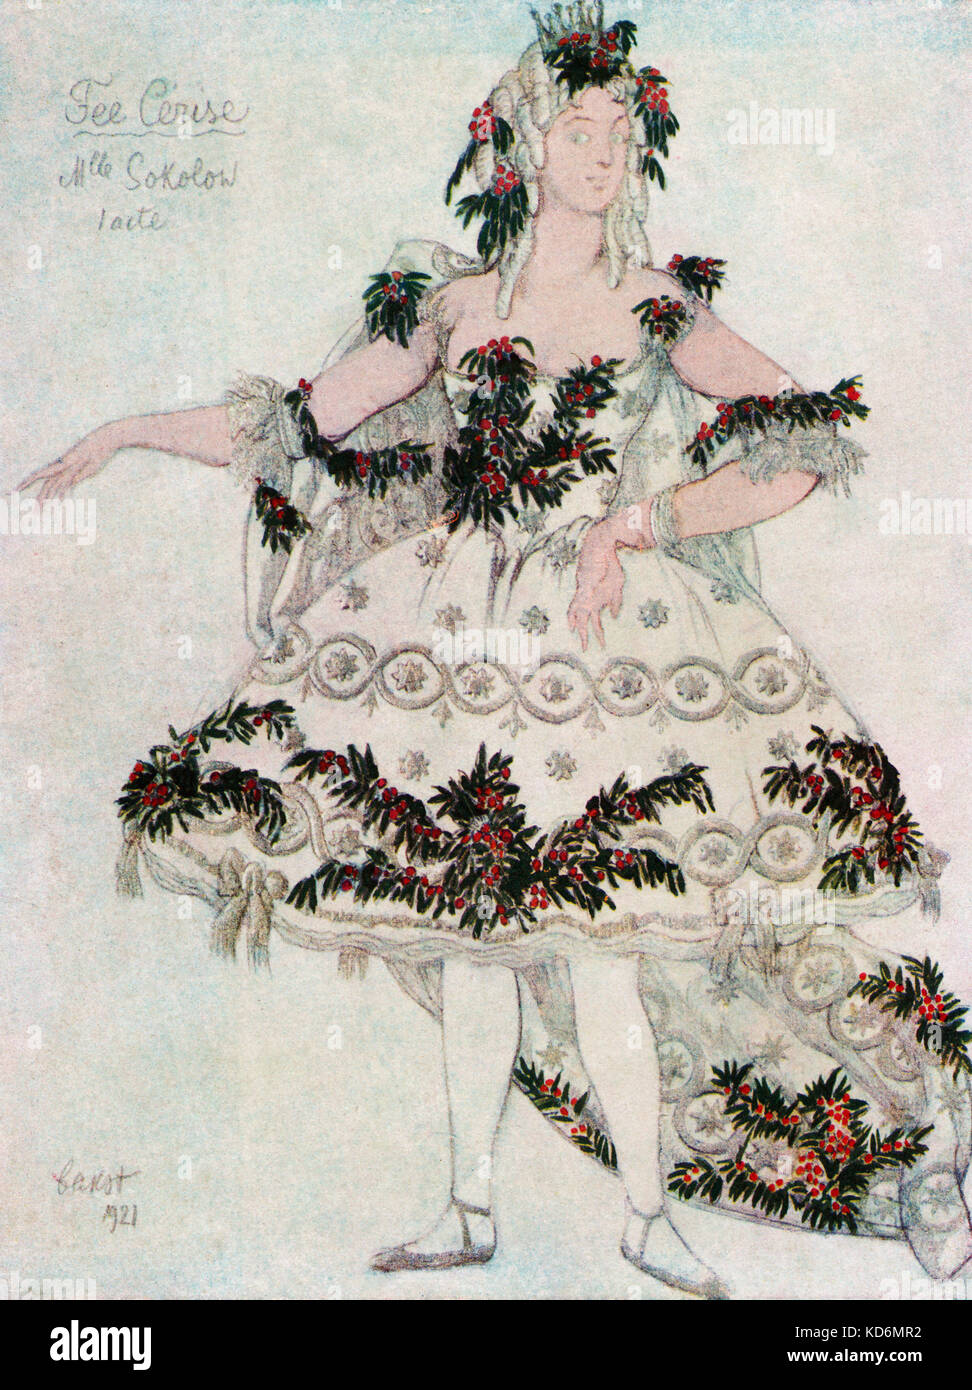 Costume for The Cherry-Fairy in ' The Sleeping Princess ', ballet to music by Tchaikovsky with variations by Stravinsky - souvenir programme from Alhambra Theatre London production, with costume designs by Leon Bakst, 1921. (1866-1924) . Tchaikovsky, Russian composer,  7 May 1840 - 6 November 1893. Stravinsky, Russian composer, 17 June 1882 - 6 April 1971. Stock Photo